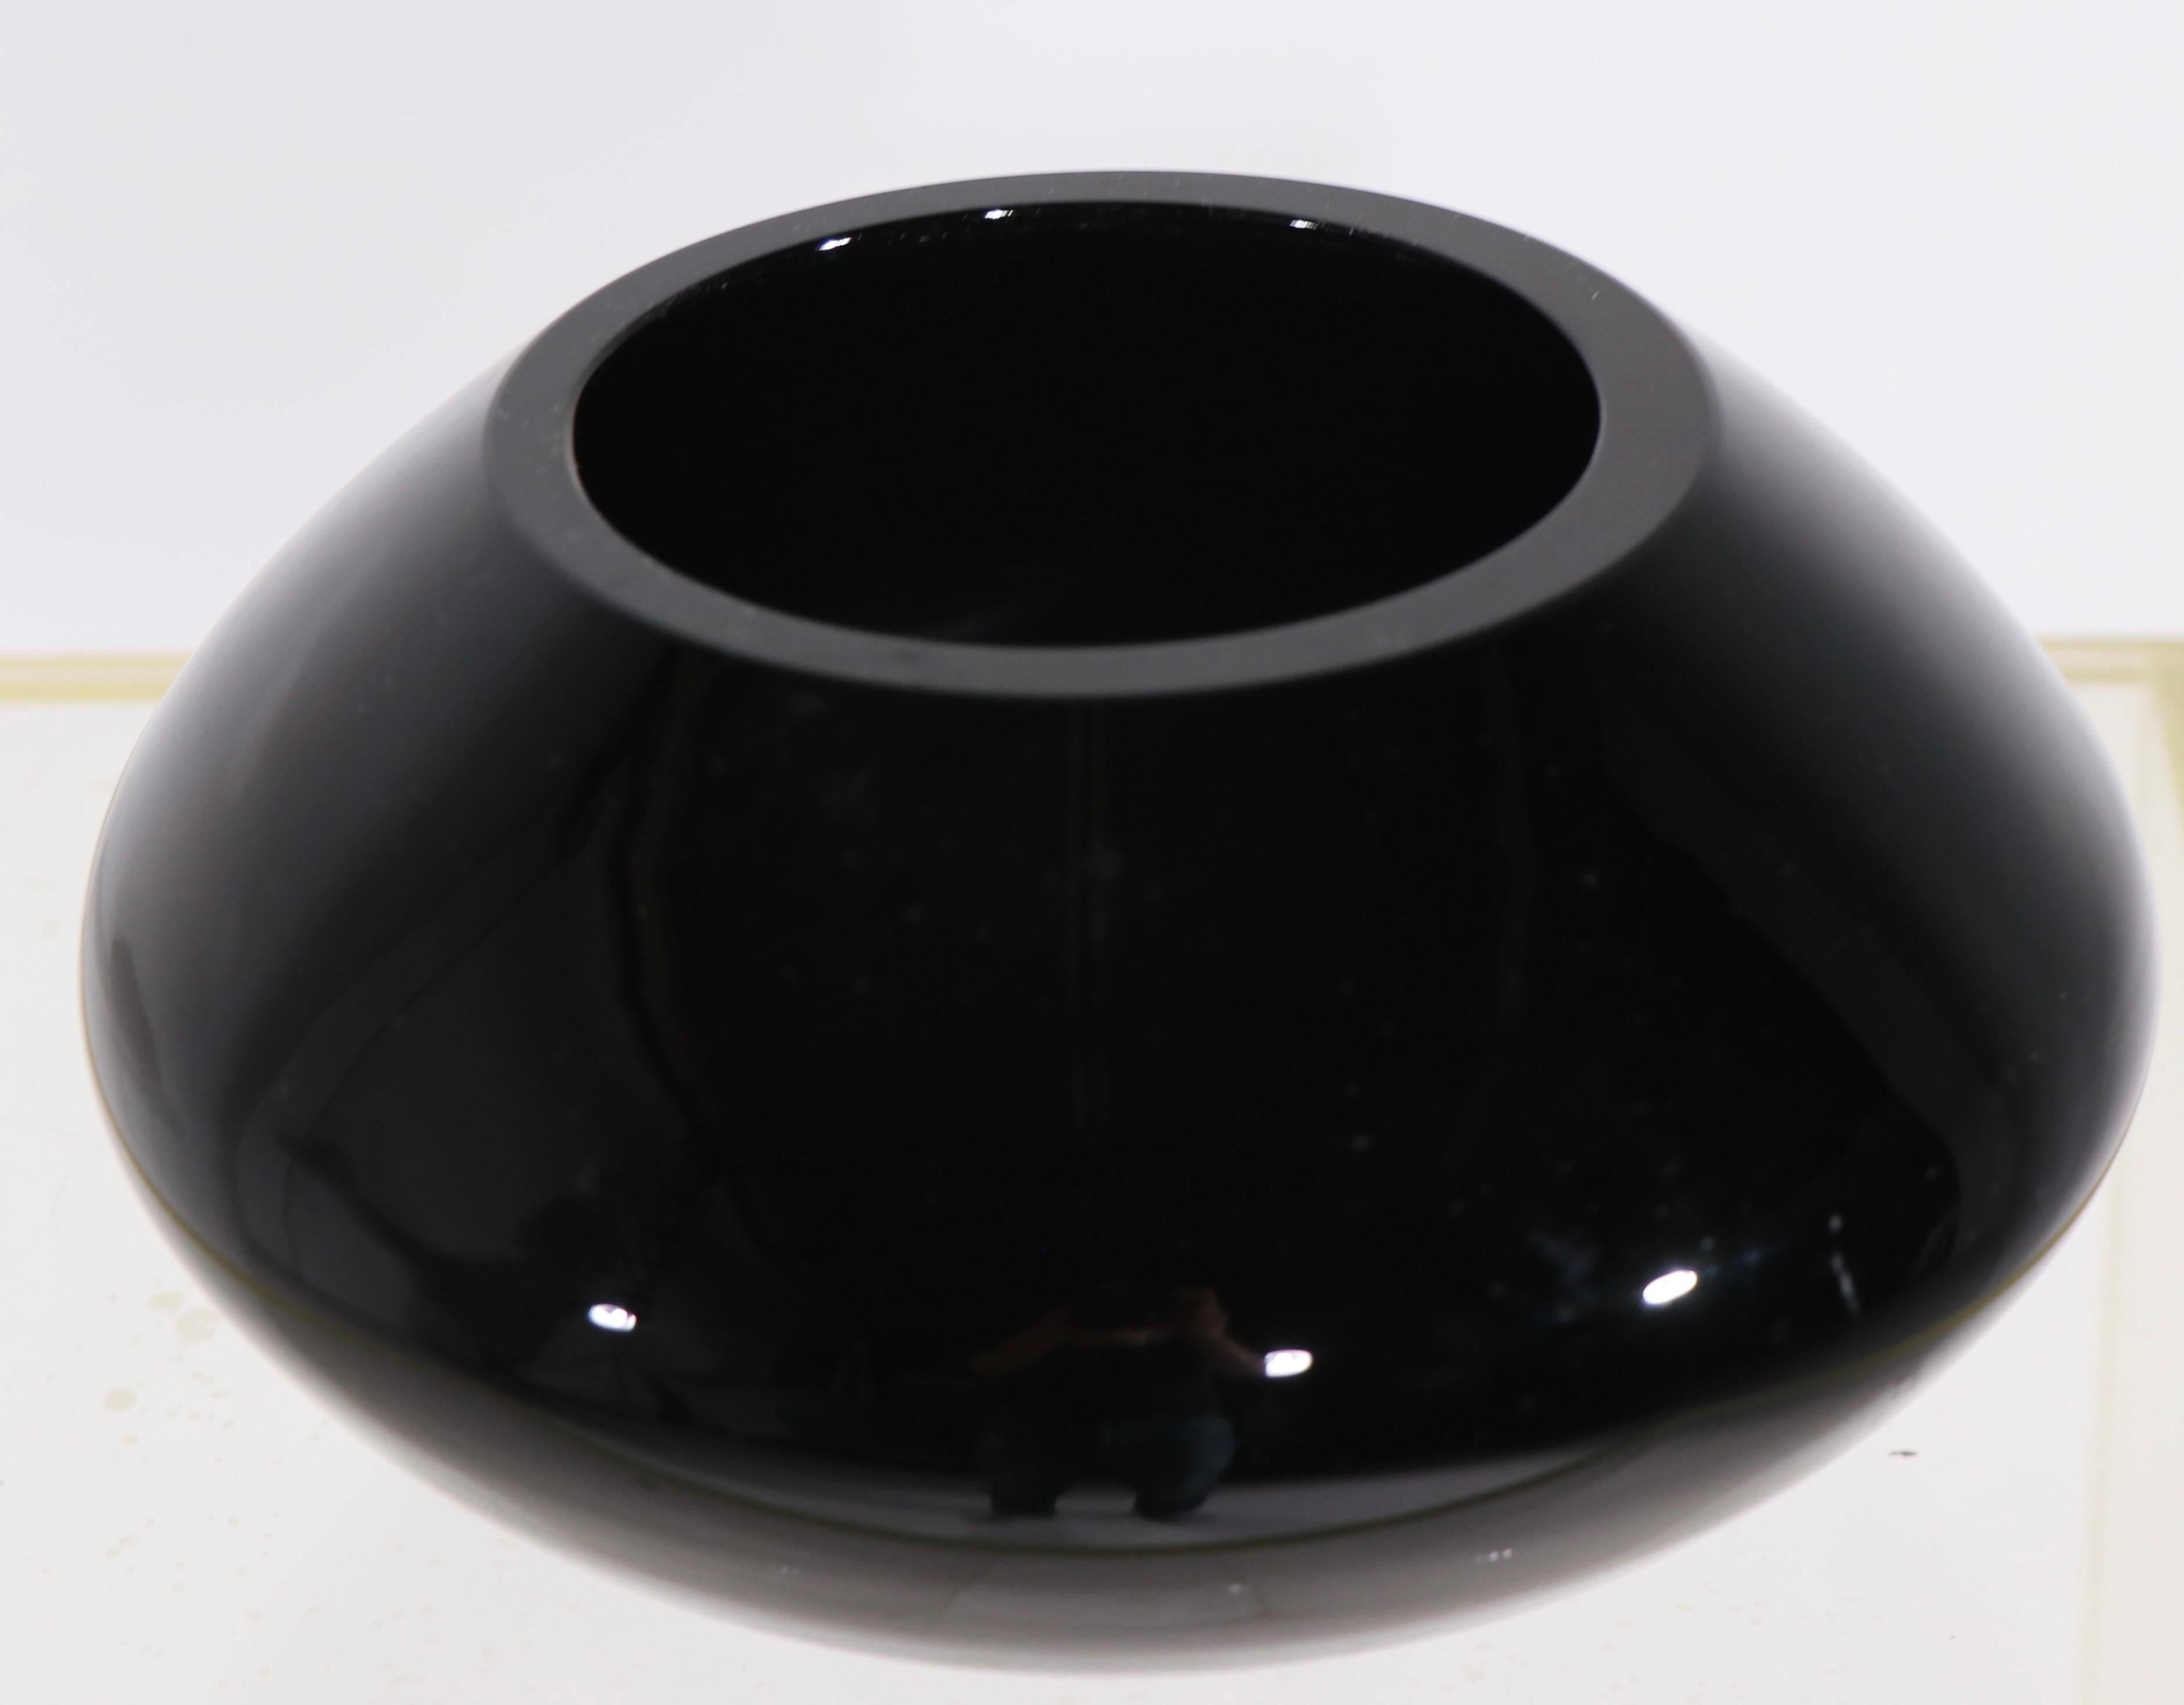 Very fine black glass bowl, attributed to George Sakier for The Fostoria Glass Company. Exceptional quality, condition, and design. Elegant, sophisticated and architectural - Art Deco, Machine Age period production, free of damage or repairs.